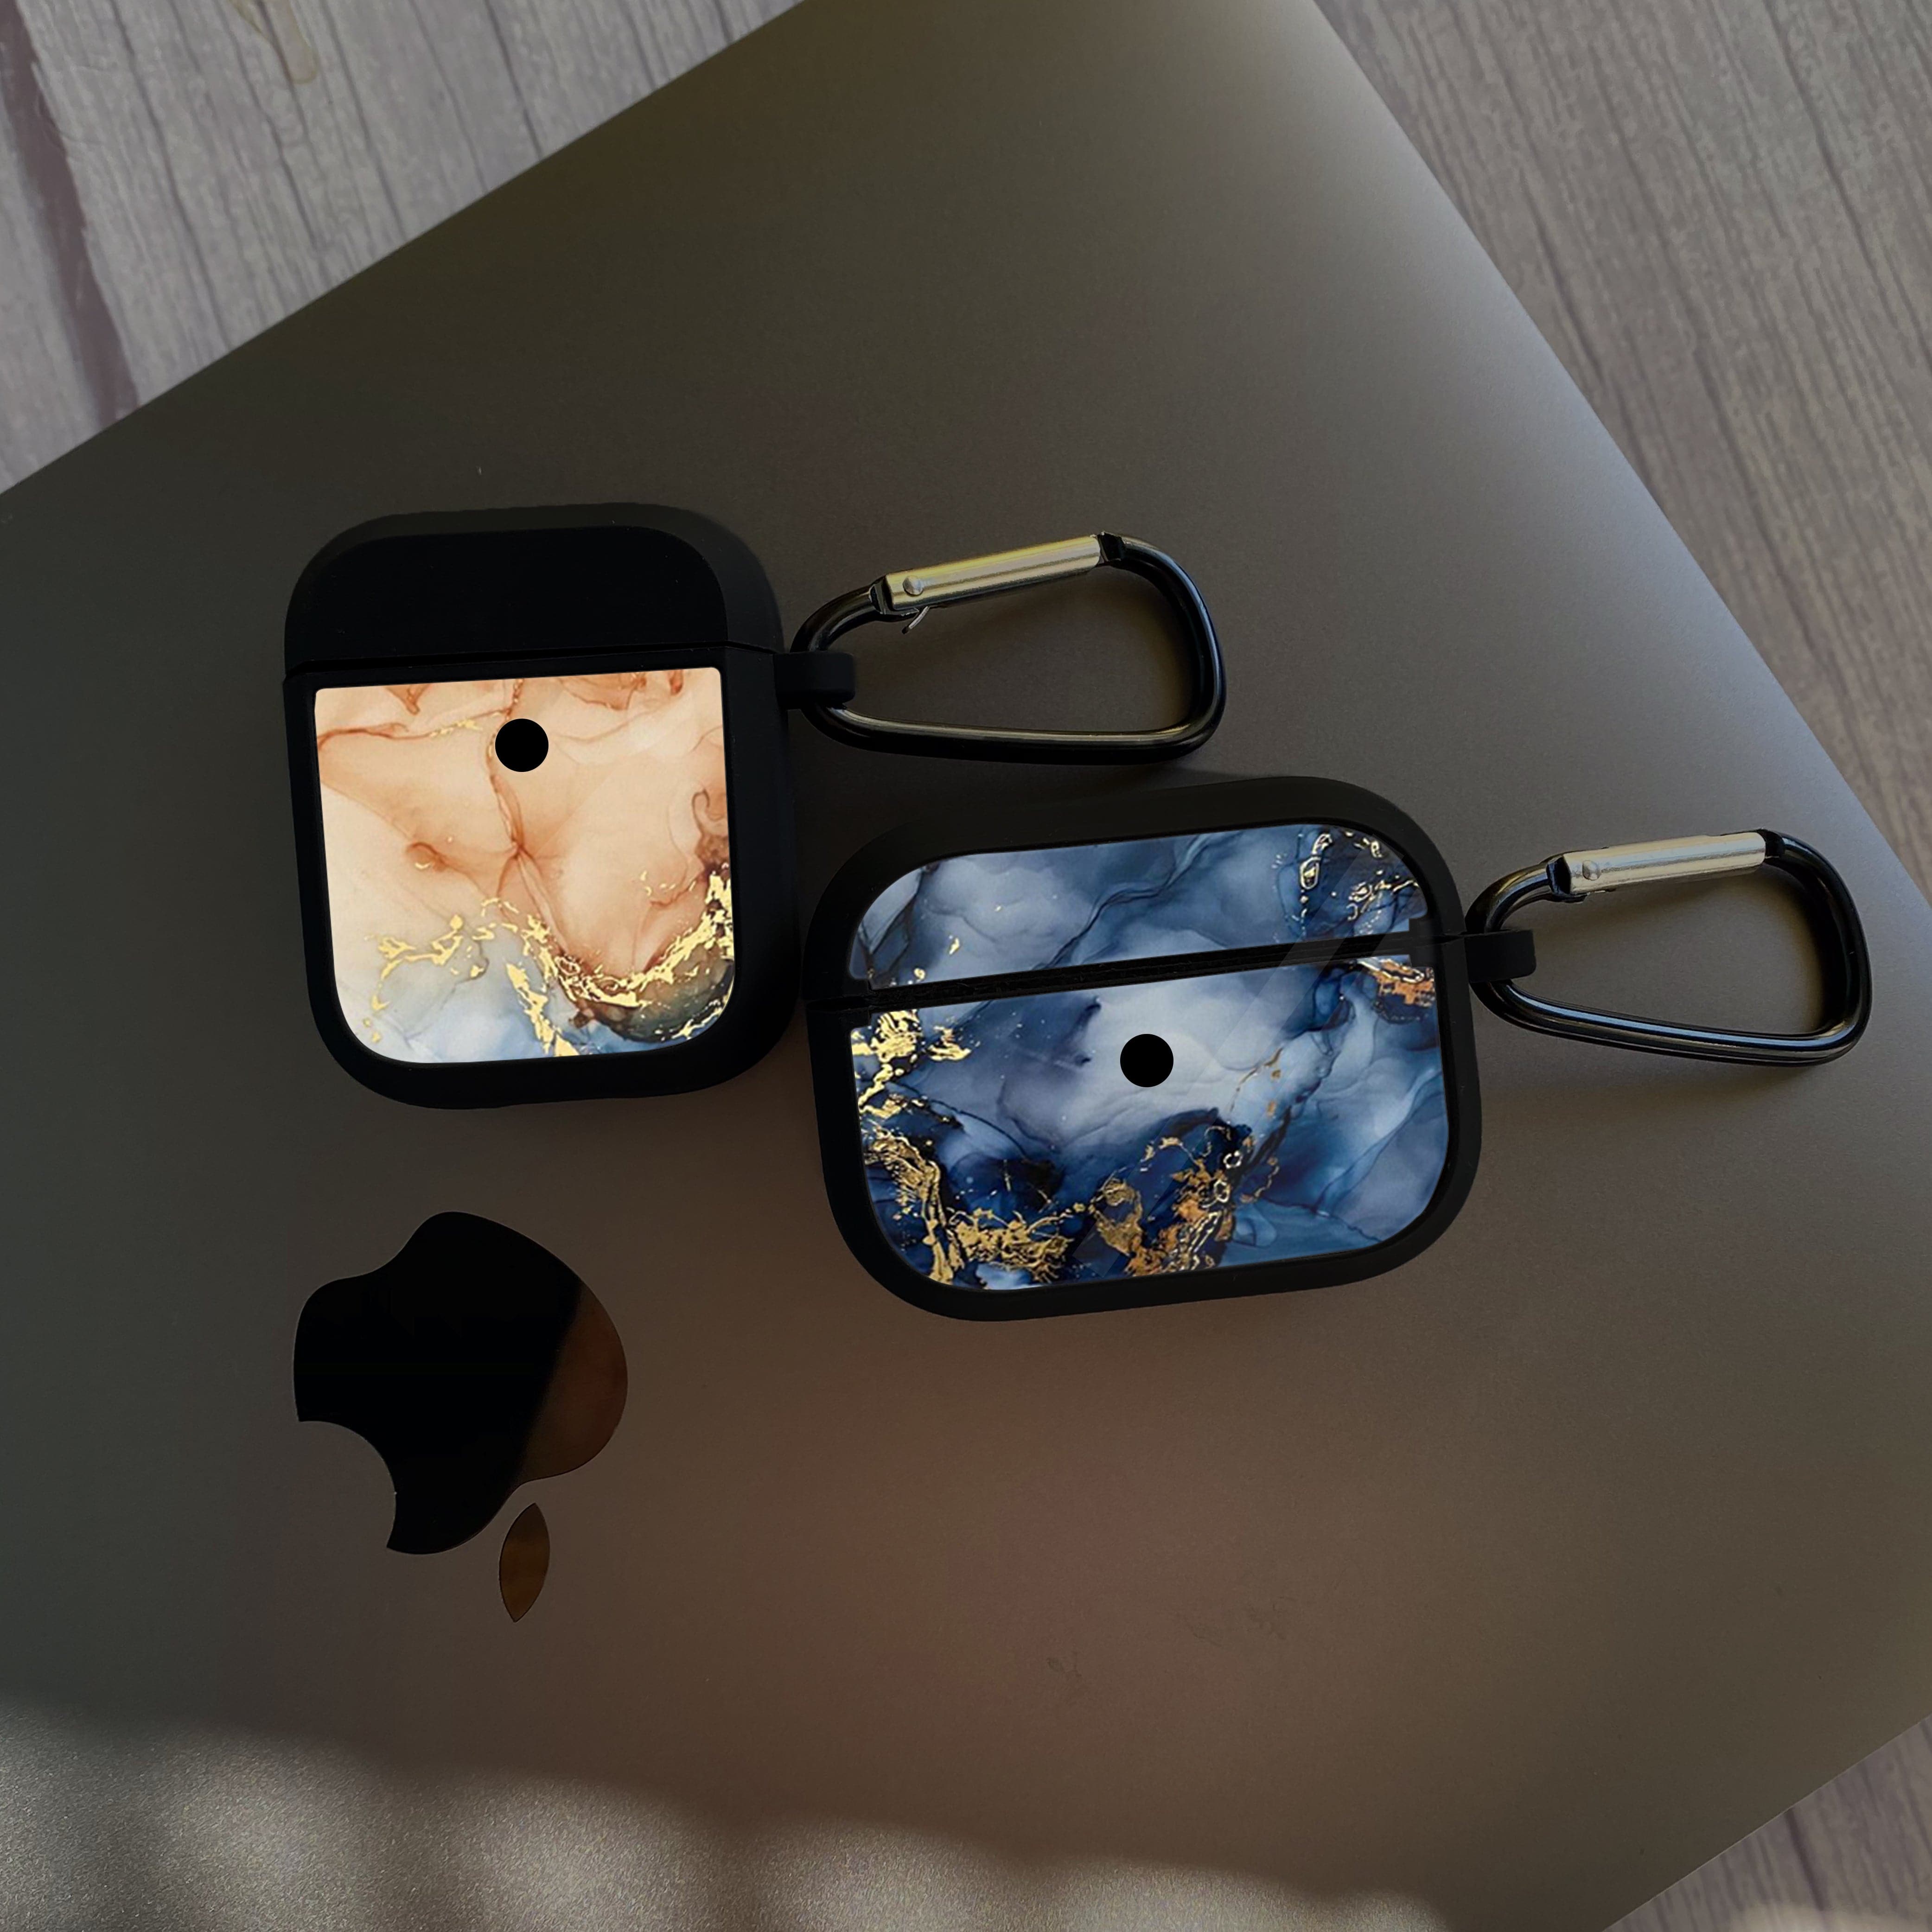 Apple Airpods Case - Blue Marble Series 09 - Premium Print with holding clip